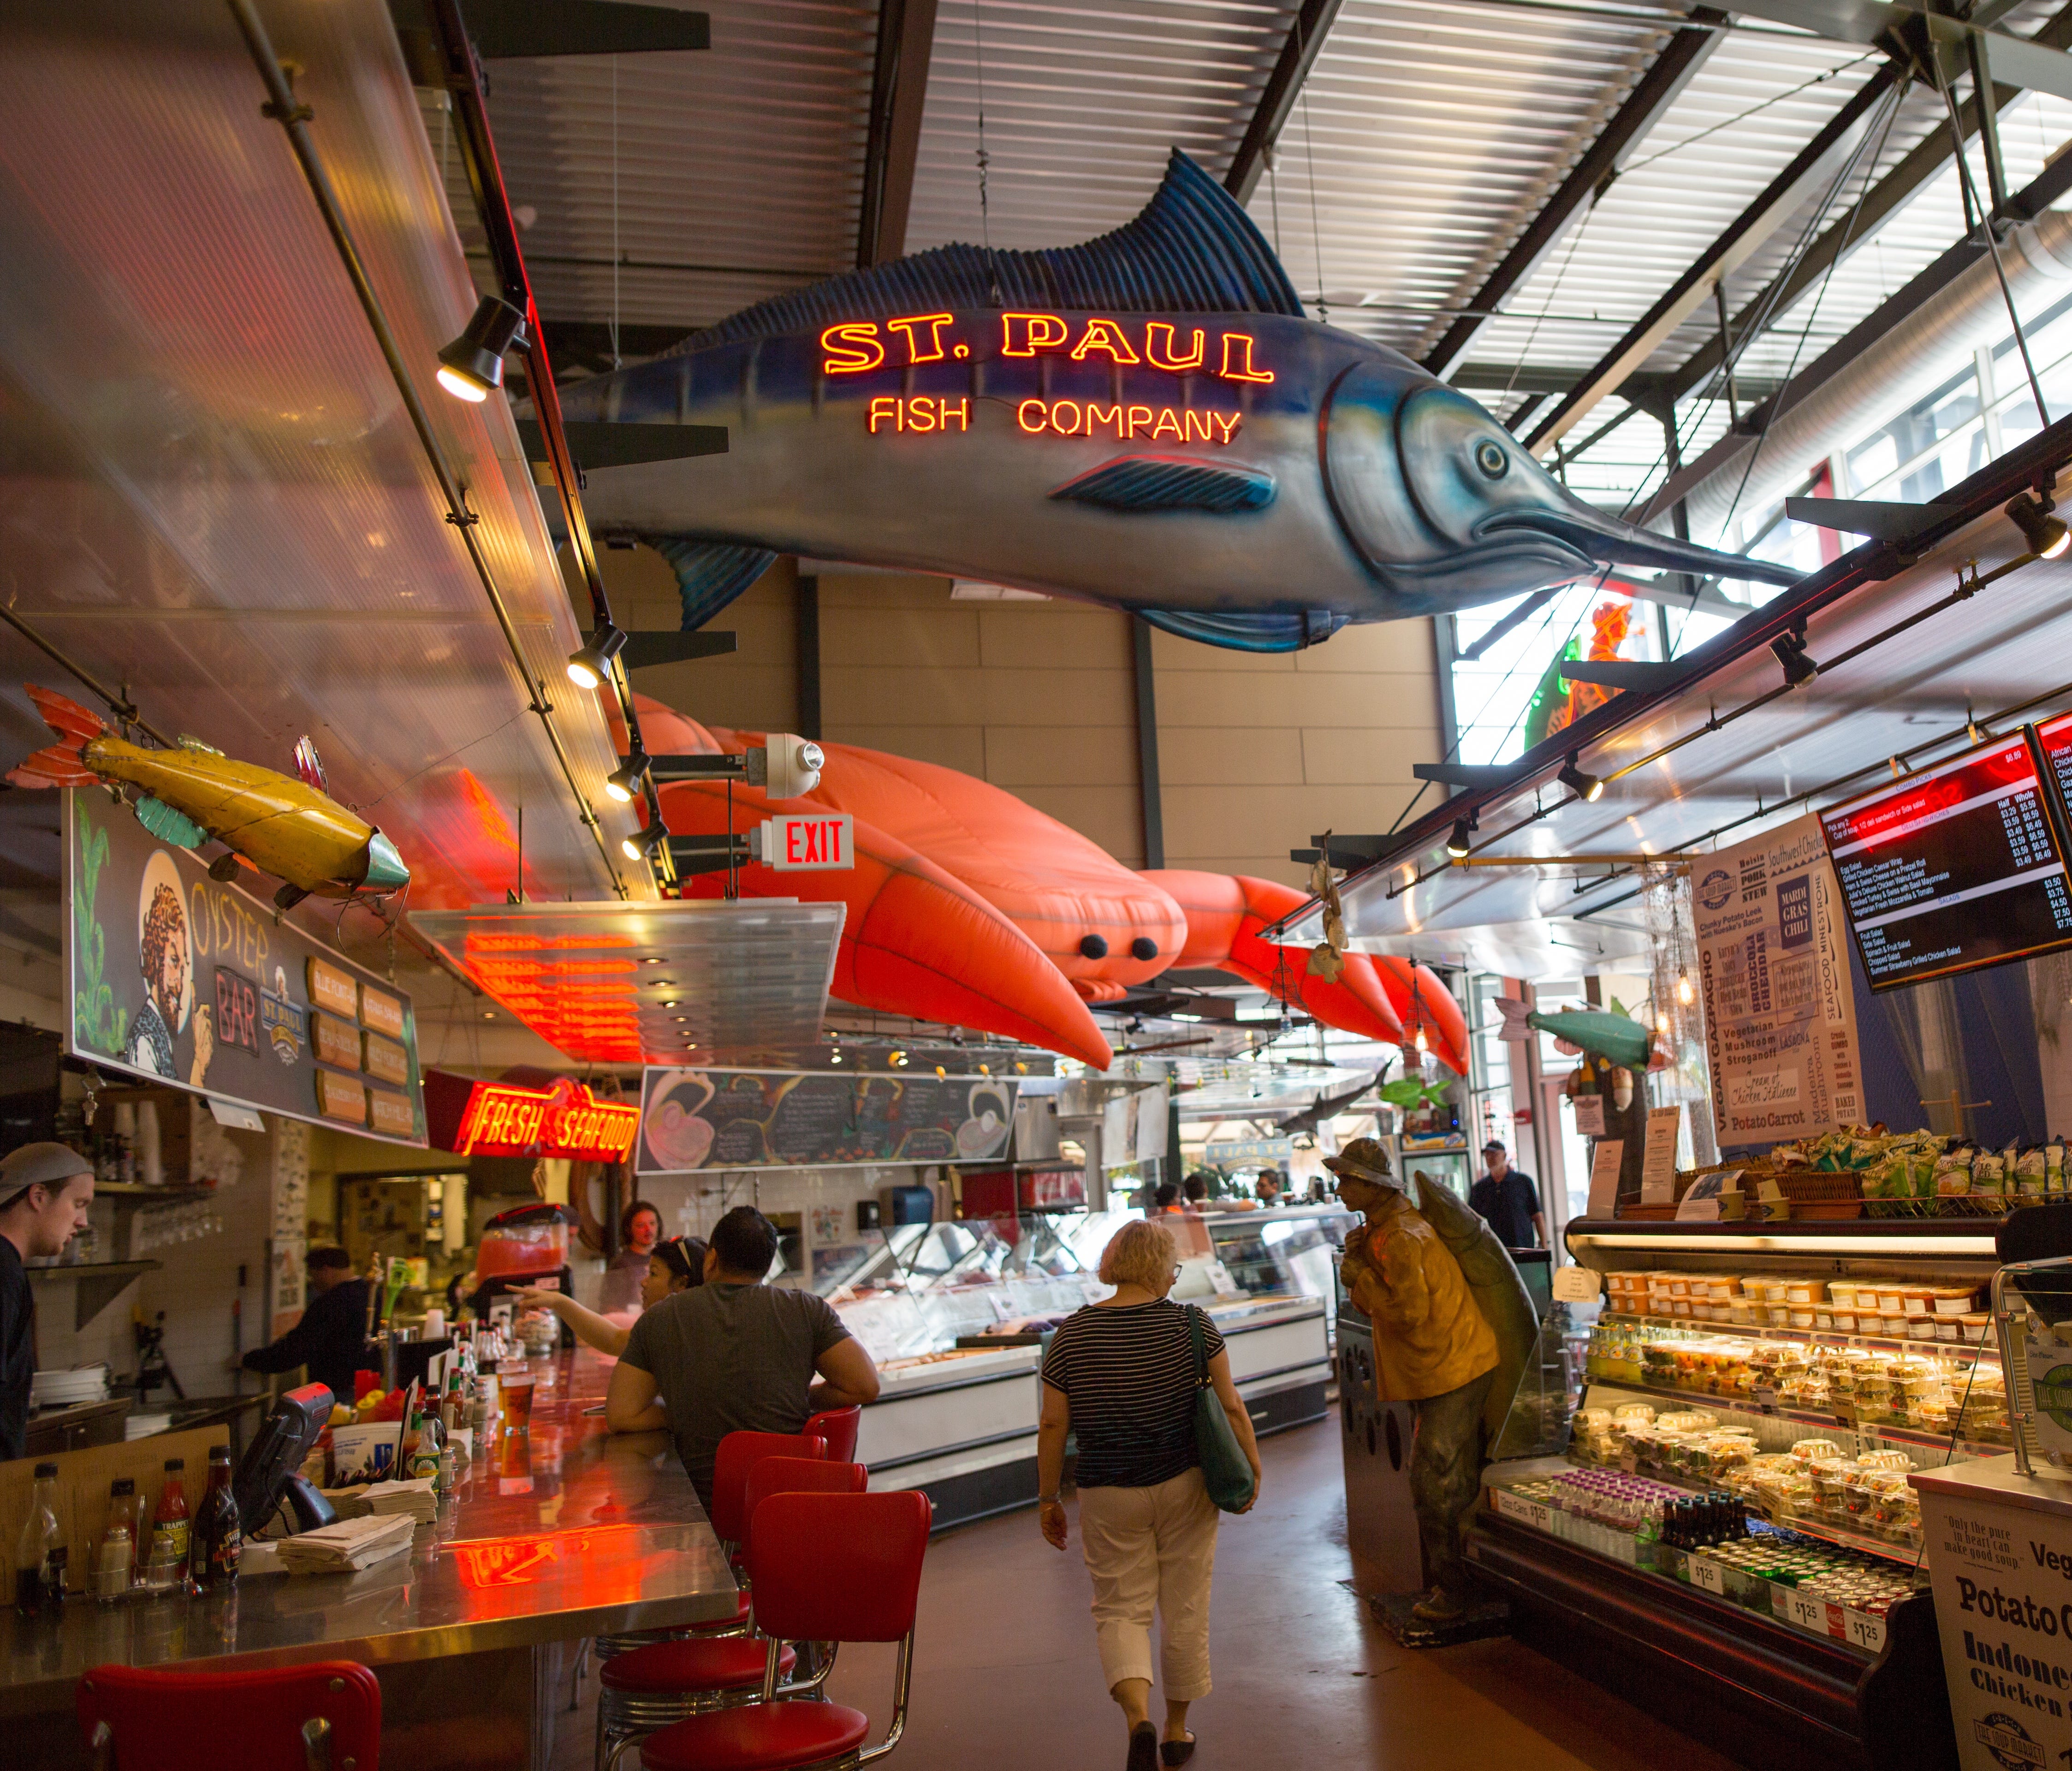 St. Paul Fish Company is a popular fish market and restaurant in the Milwaukee Public Market.